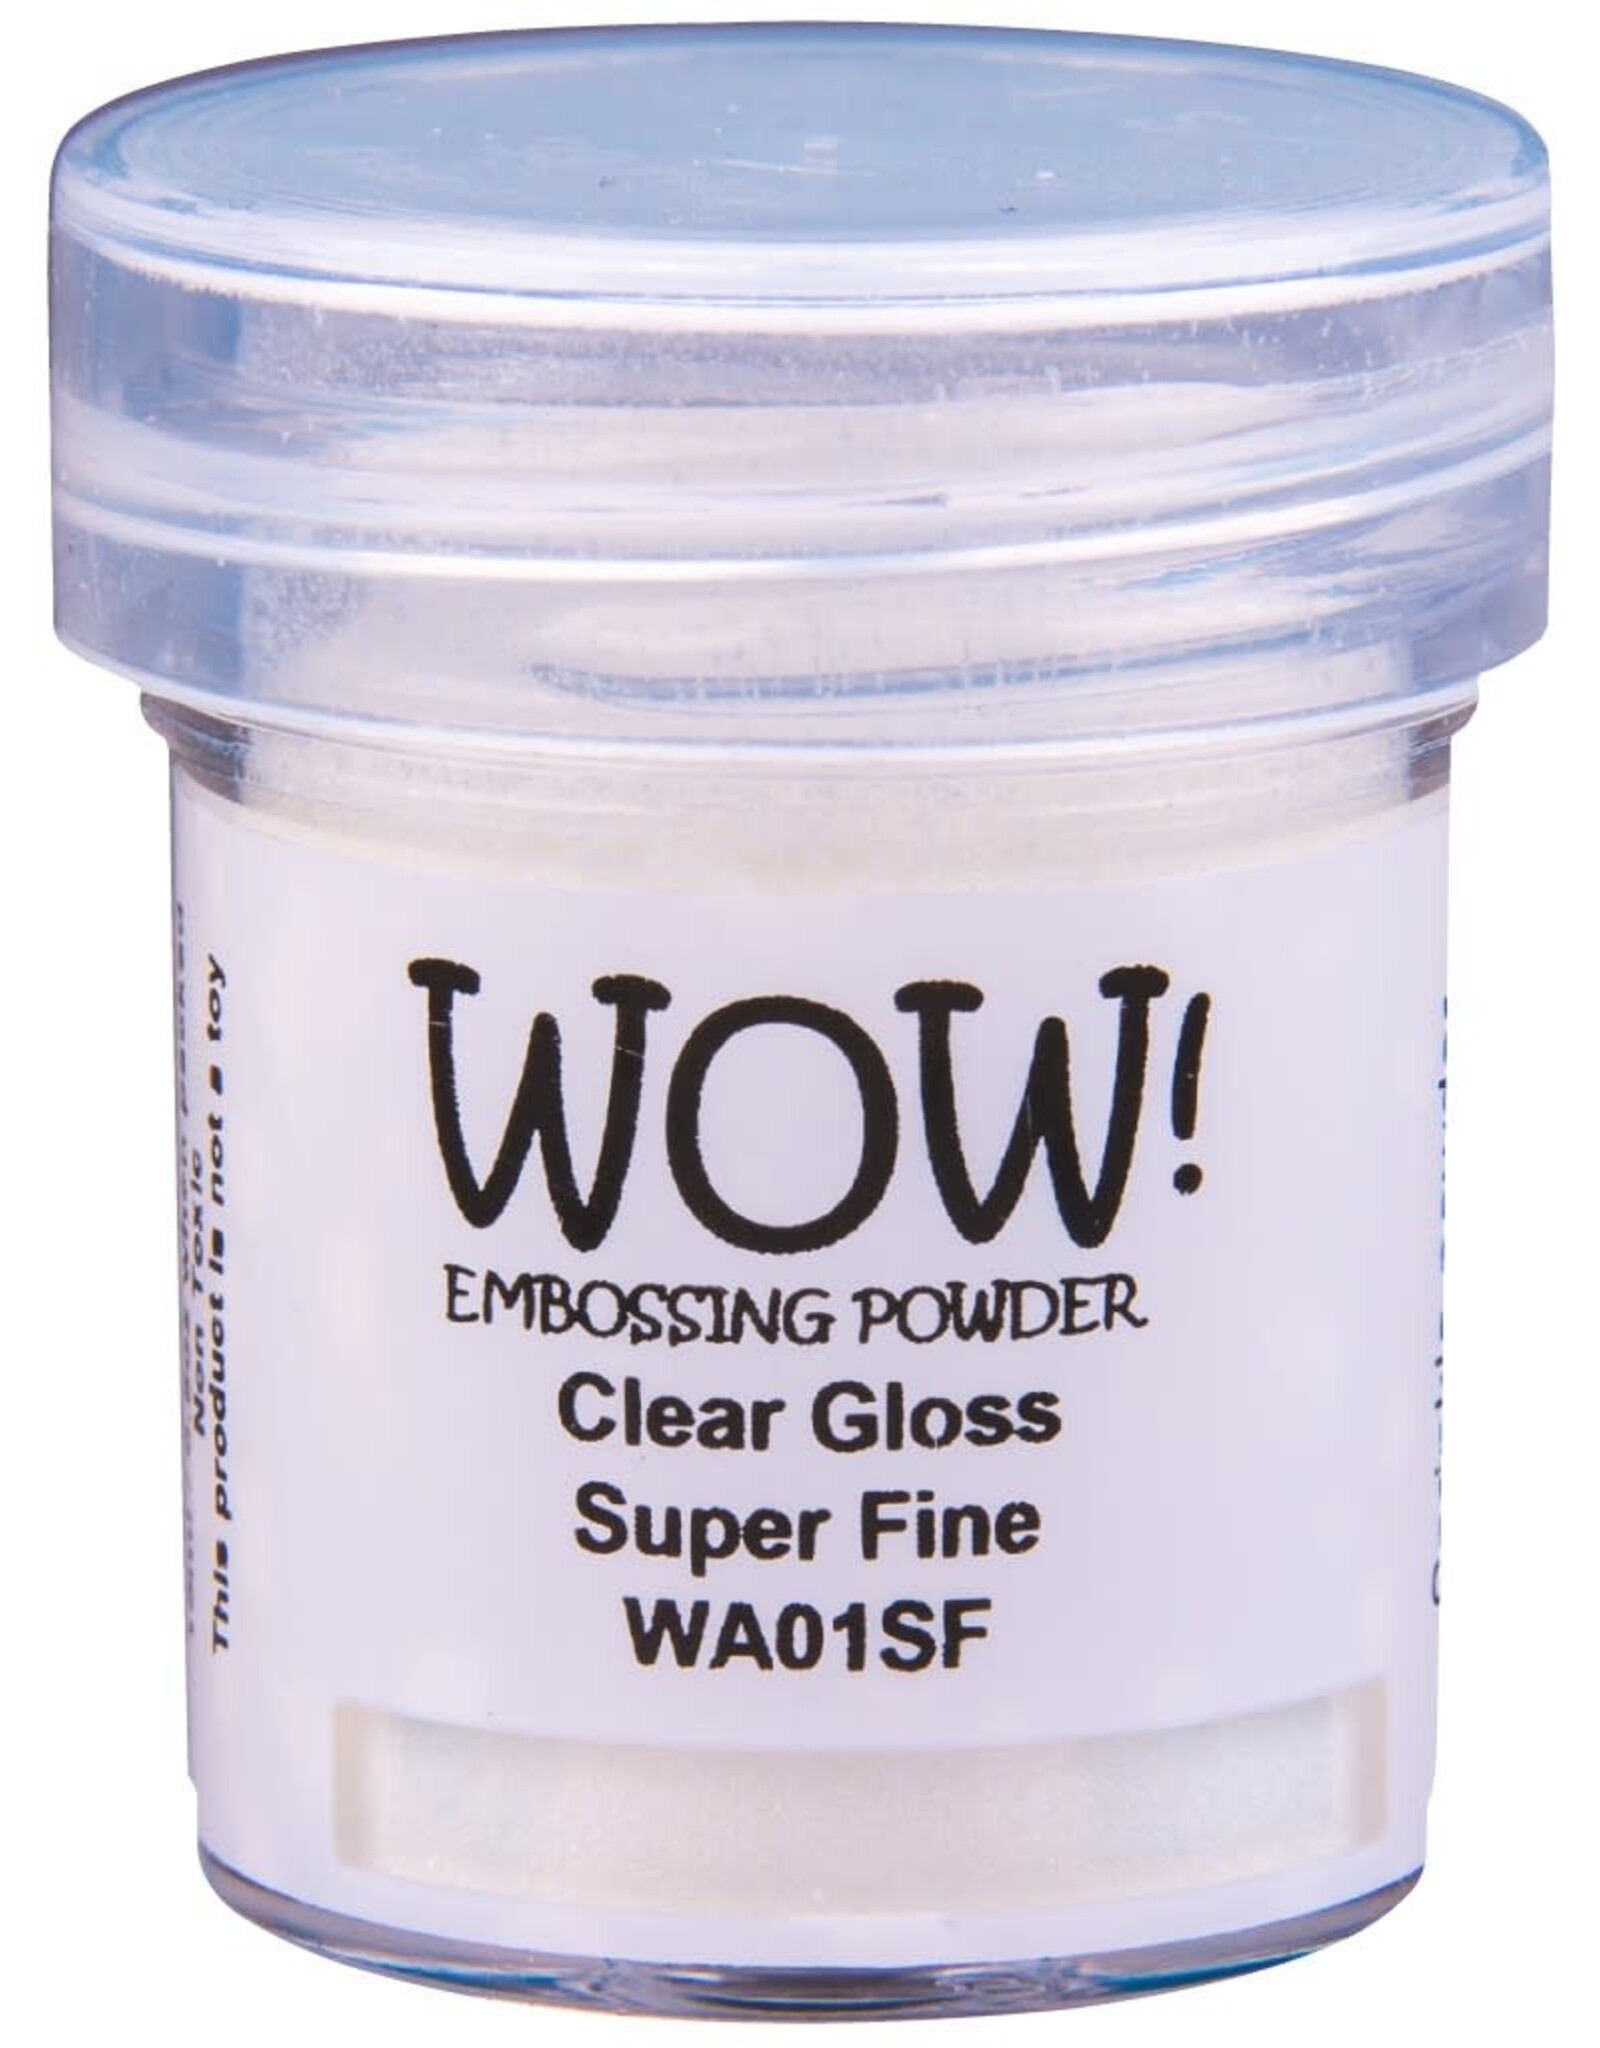 WOW! WOW! CLEAR GLOSS SUPER FINE EMBOSSING POWDER